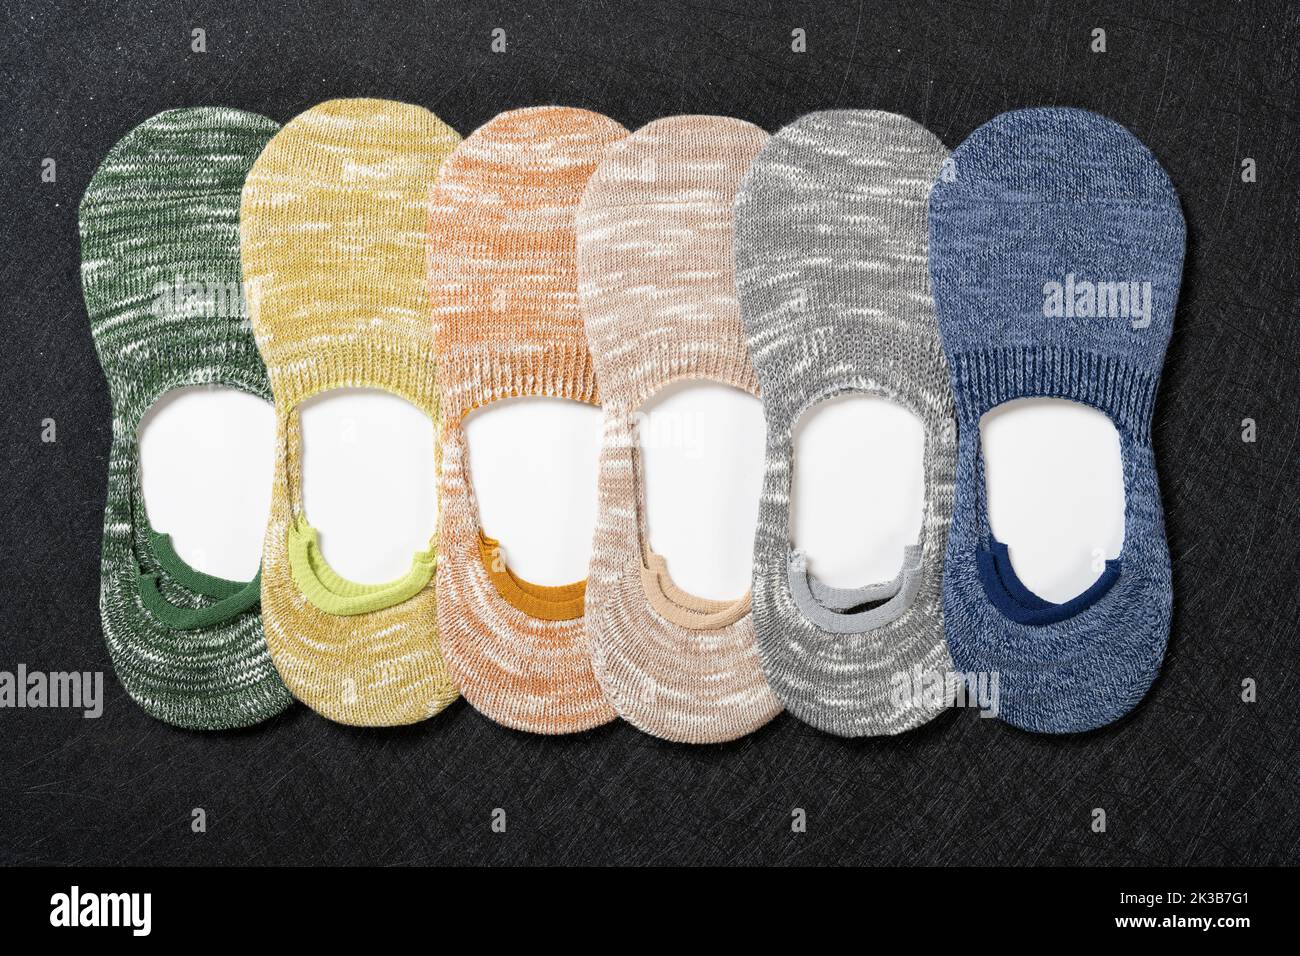 top view different colors socks for men on a black background Stock Photo